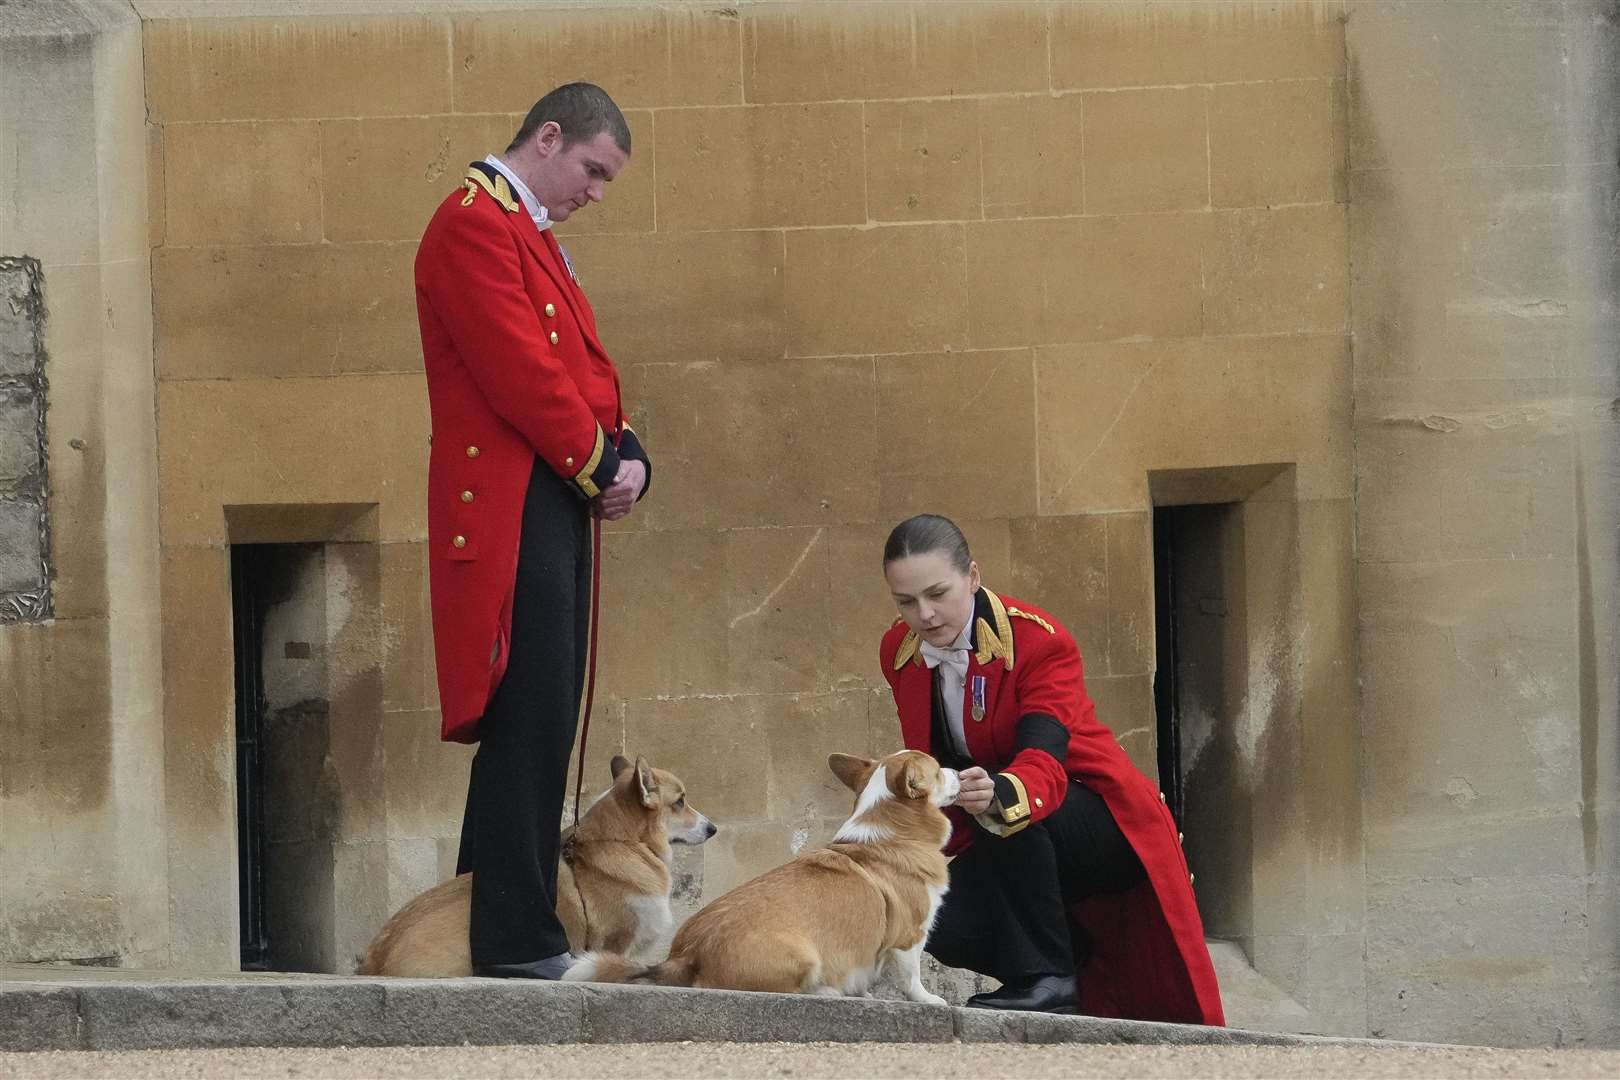 The Queen’s corgis, Muick and Sandy, were brought outside during the Ceremonial Procession through Windsor Castle (Gregorio Borgia/PA)